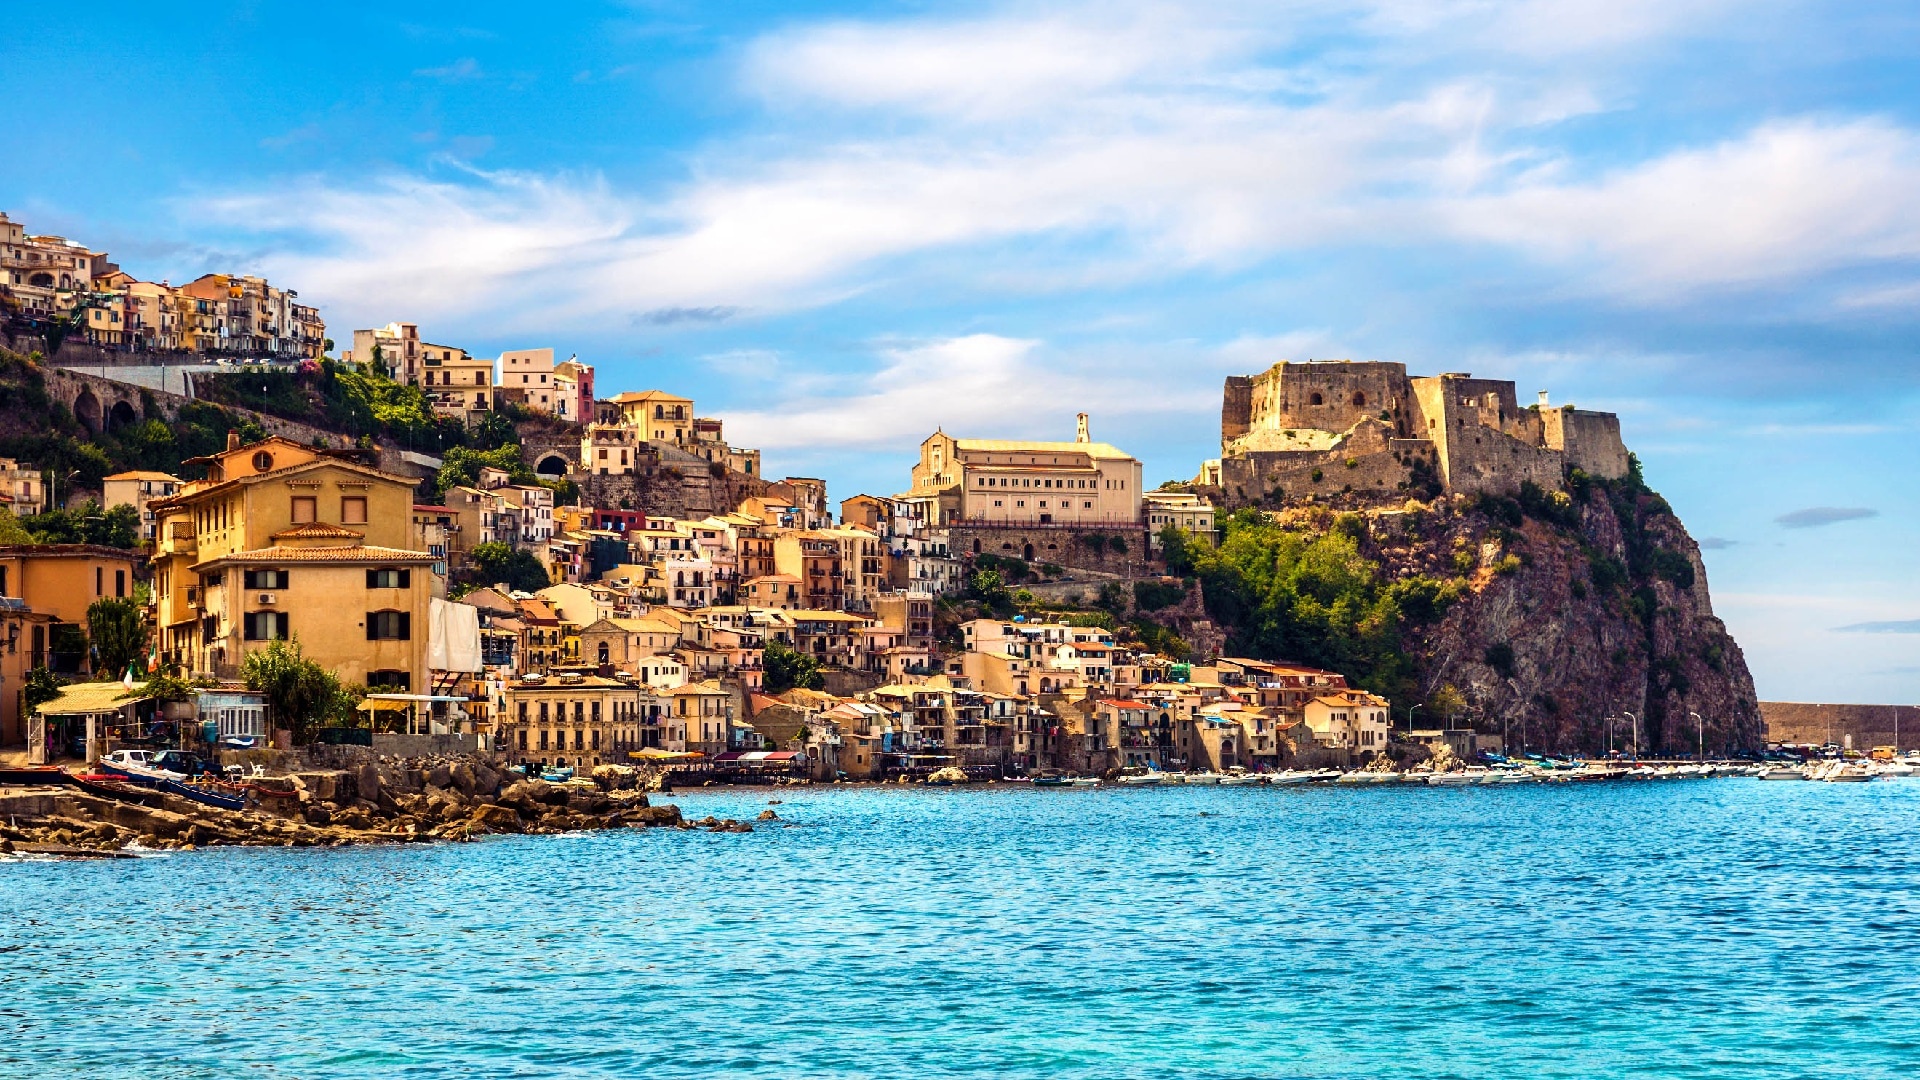 Calabria, Southern Italy, 44 000, Move, 1920x1080 Full HD Desktop